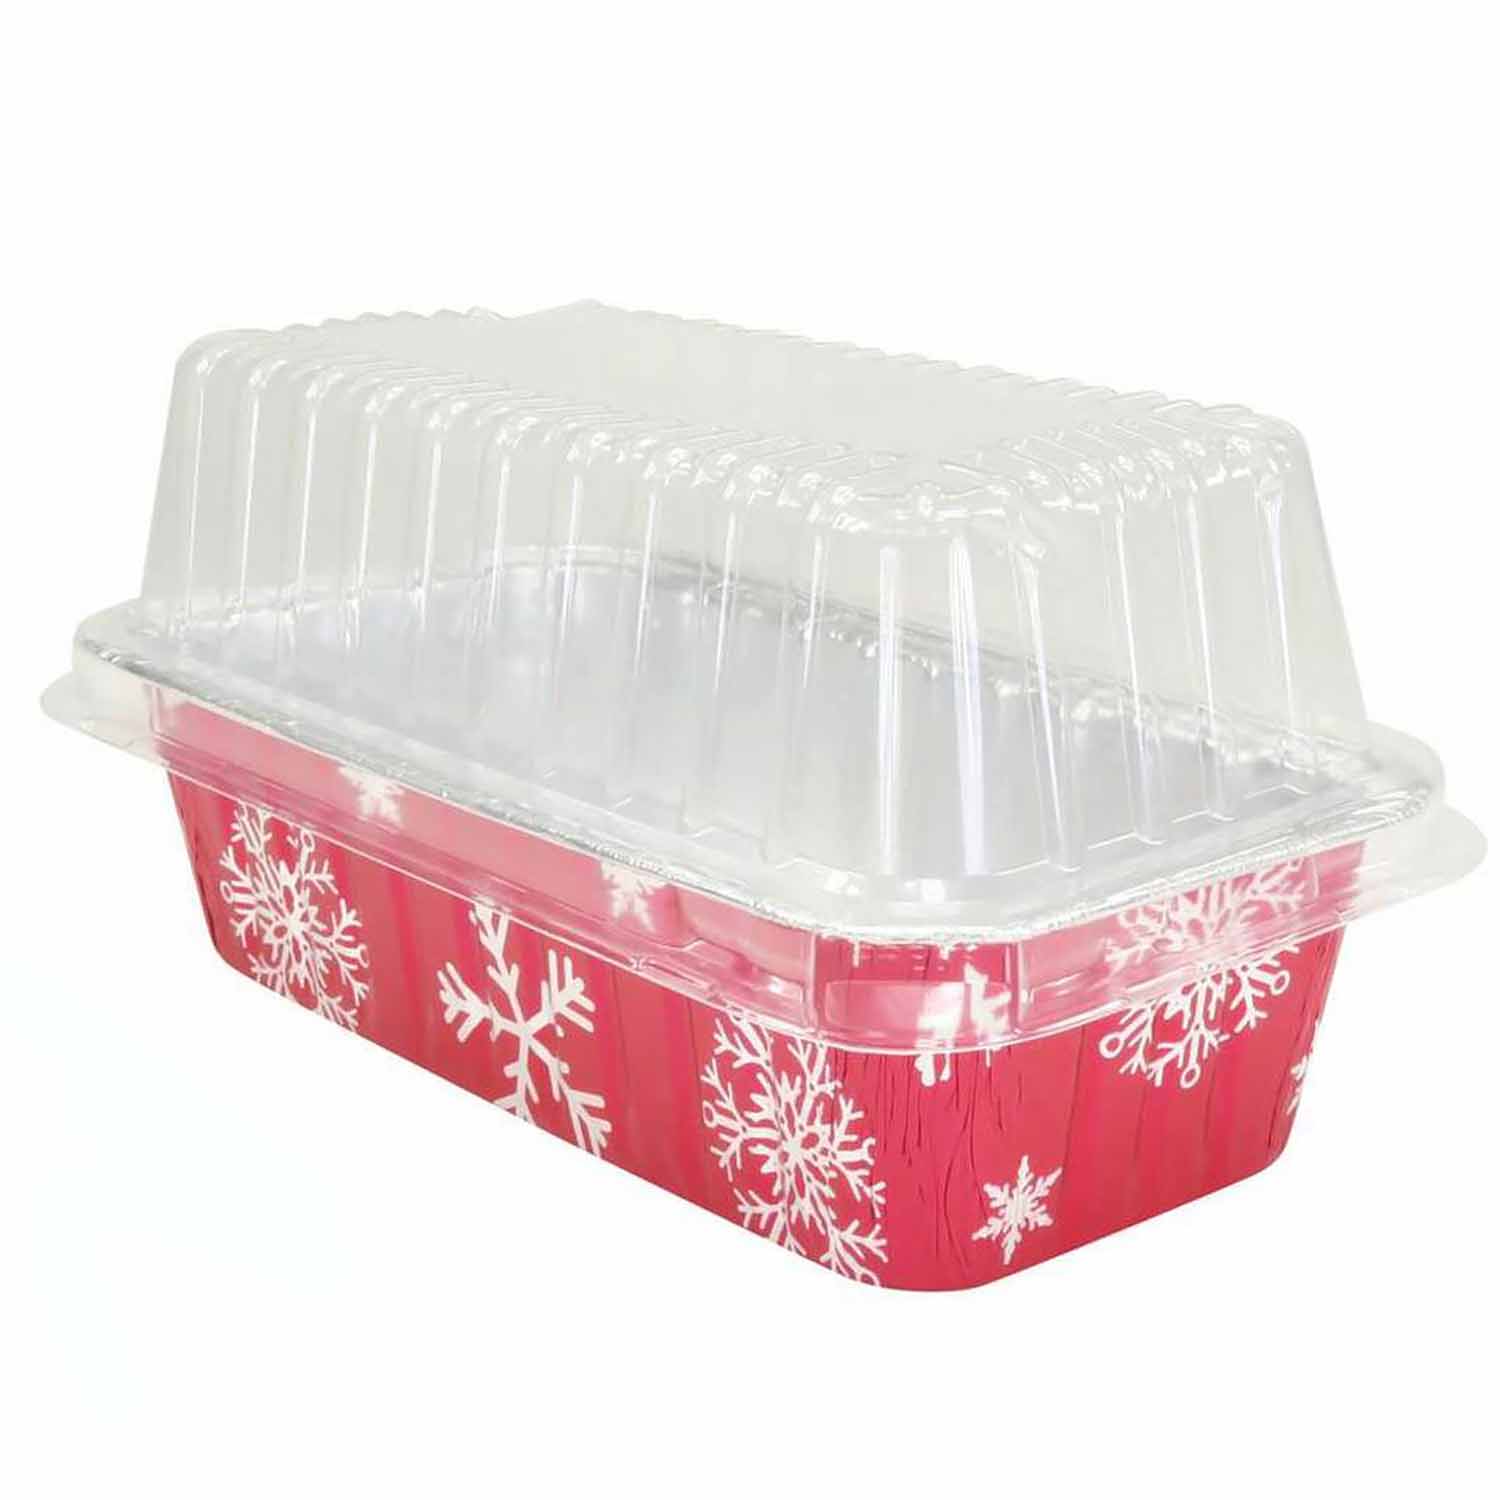 2 lb Snowflake Foil Loaf Pan with Dome Lid